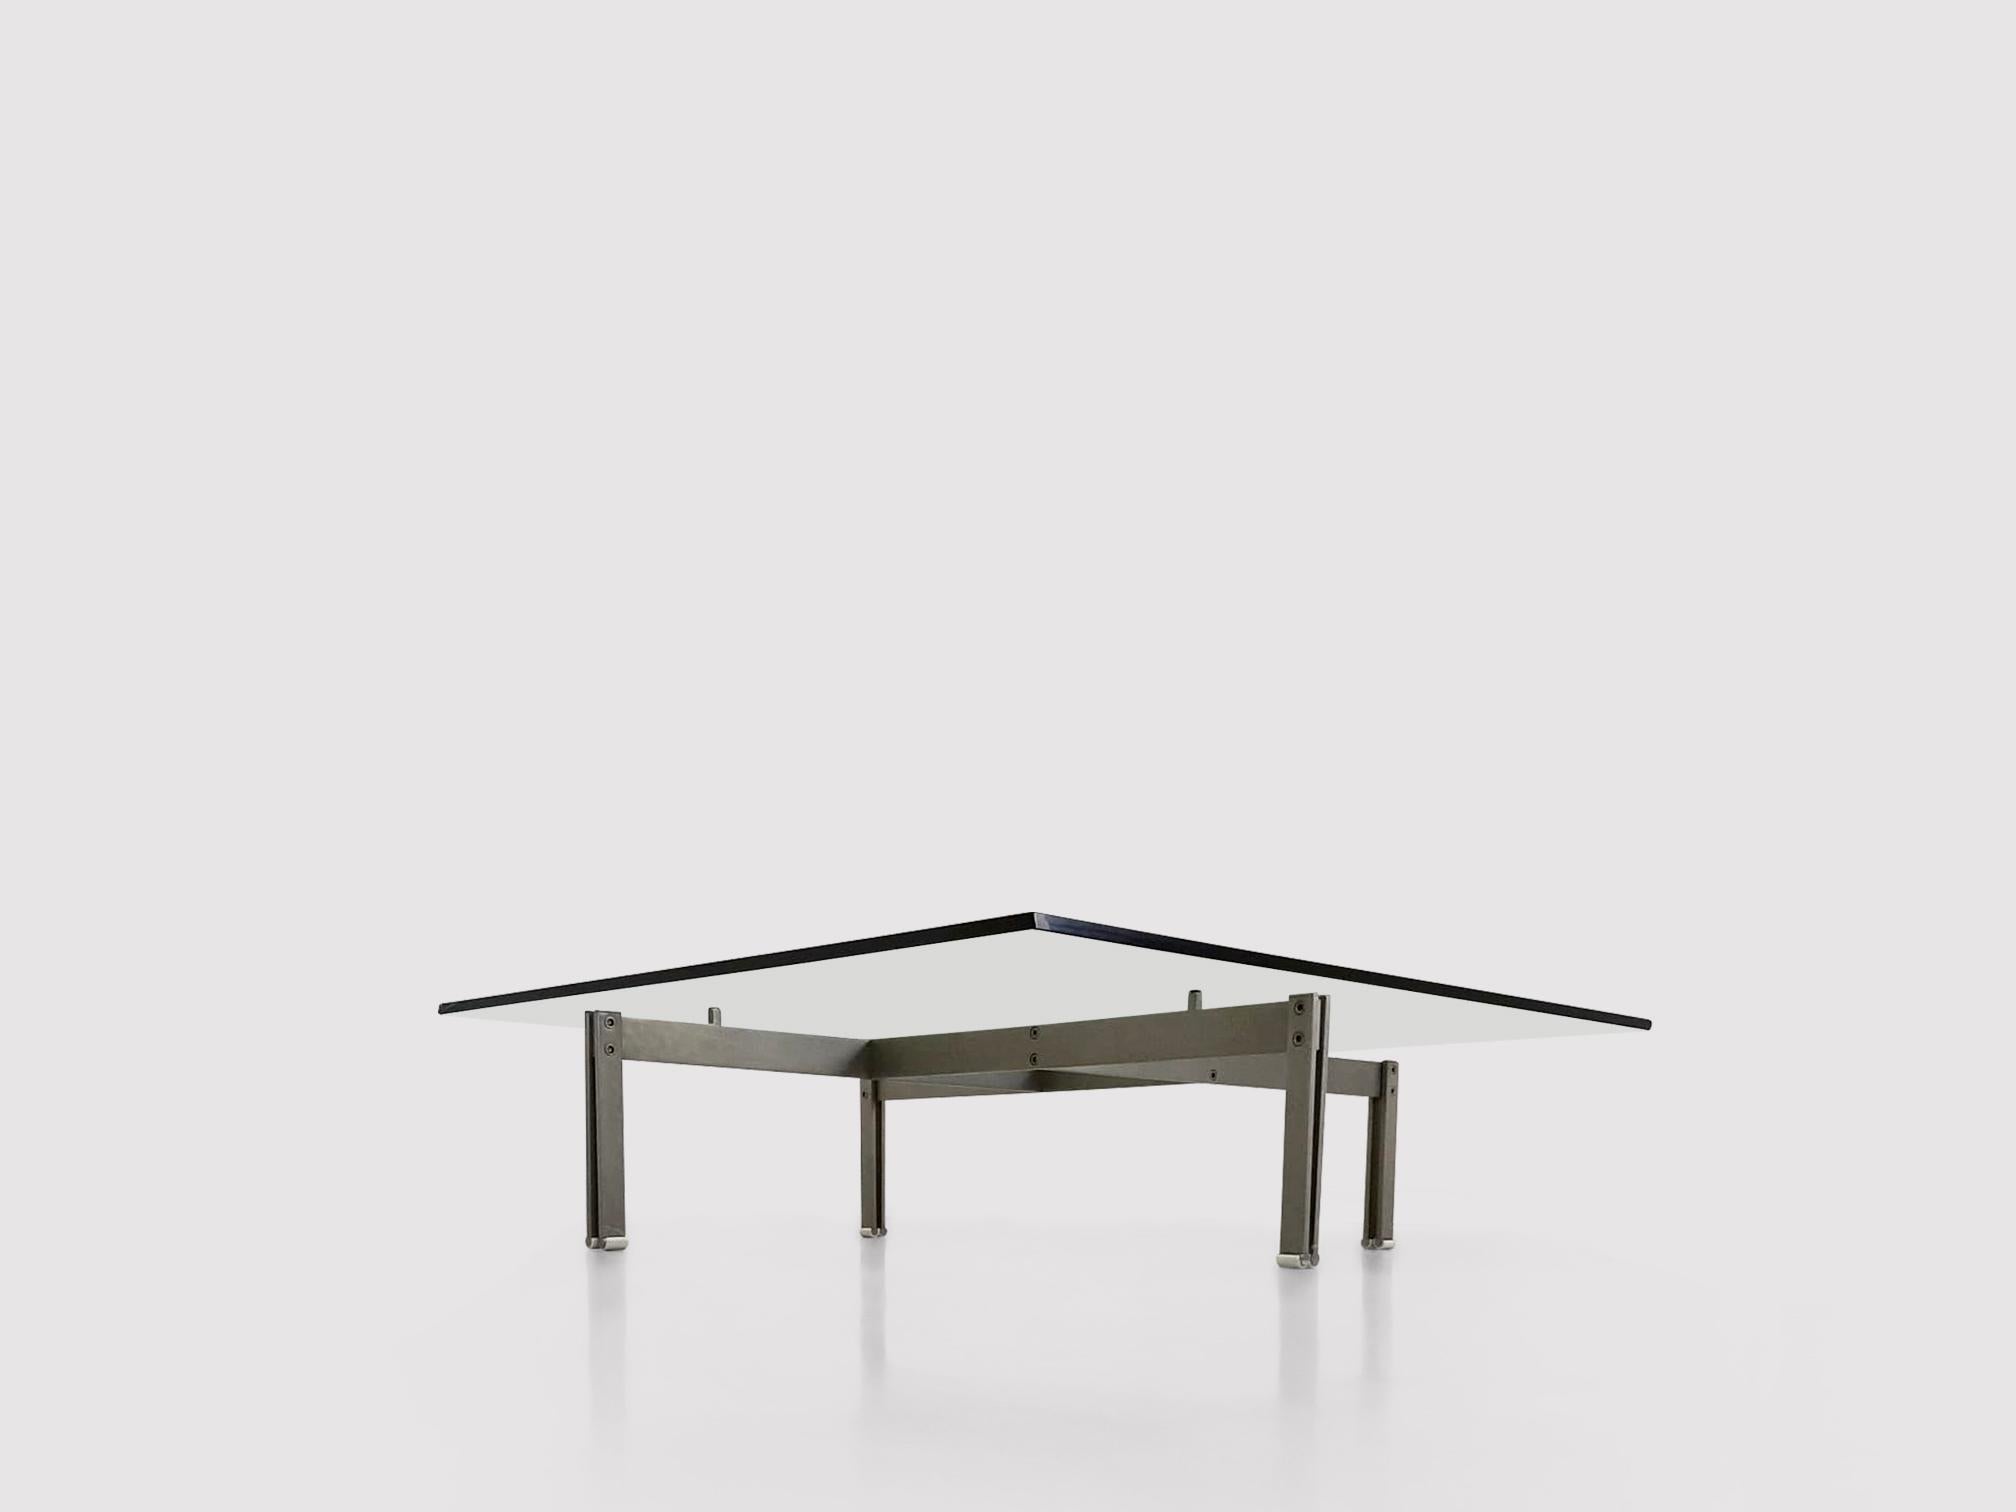 Italian Onda Brushed Steel and Glass Coffee Table by Giovanni Offredi for Saporiti 1970s For Sale